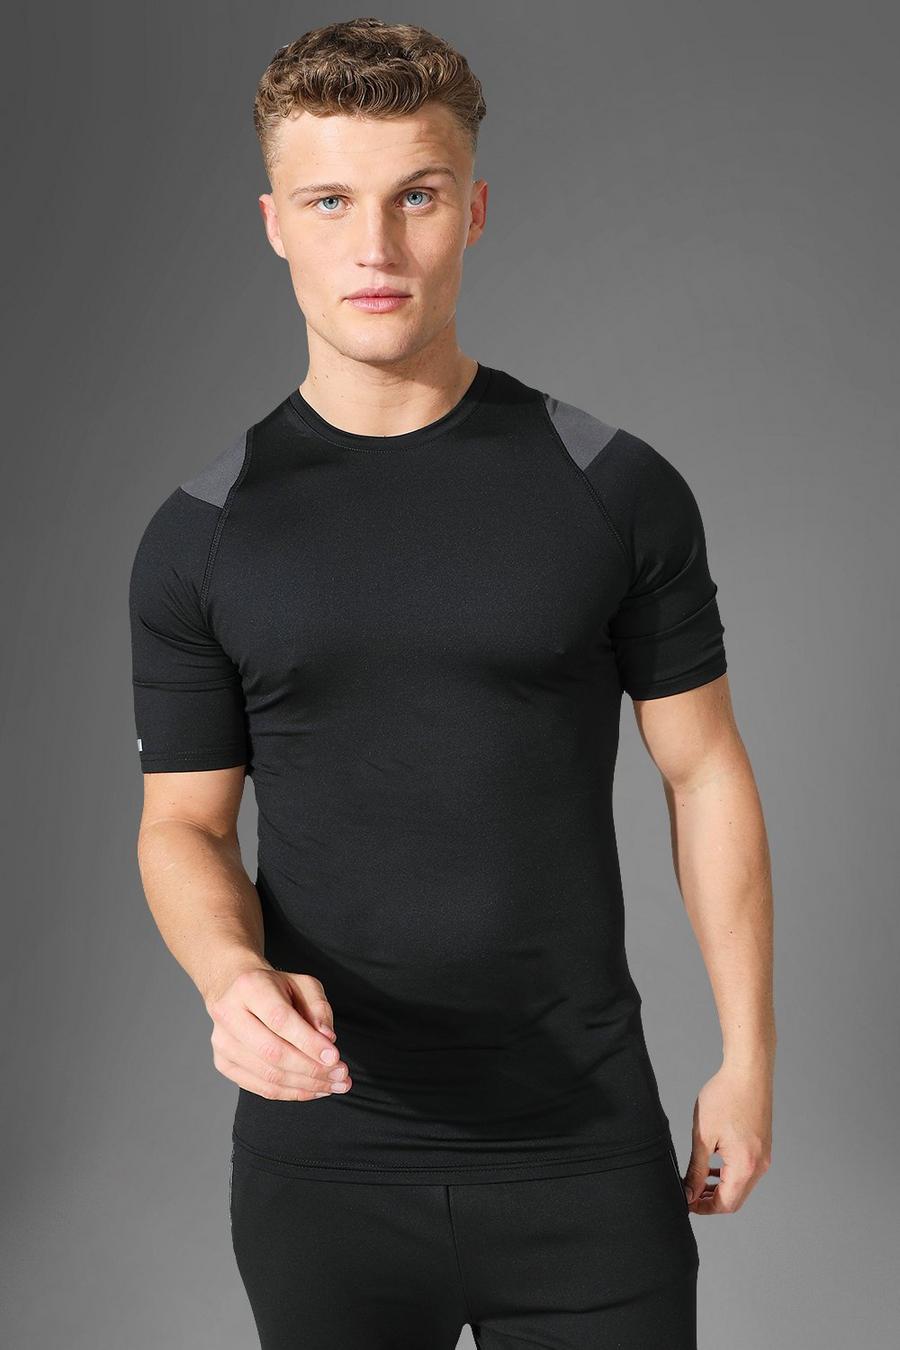 T-shirt Man Active Gym a compressione a contrasto, Black nero image number 1